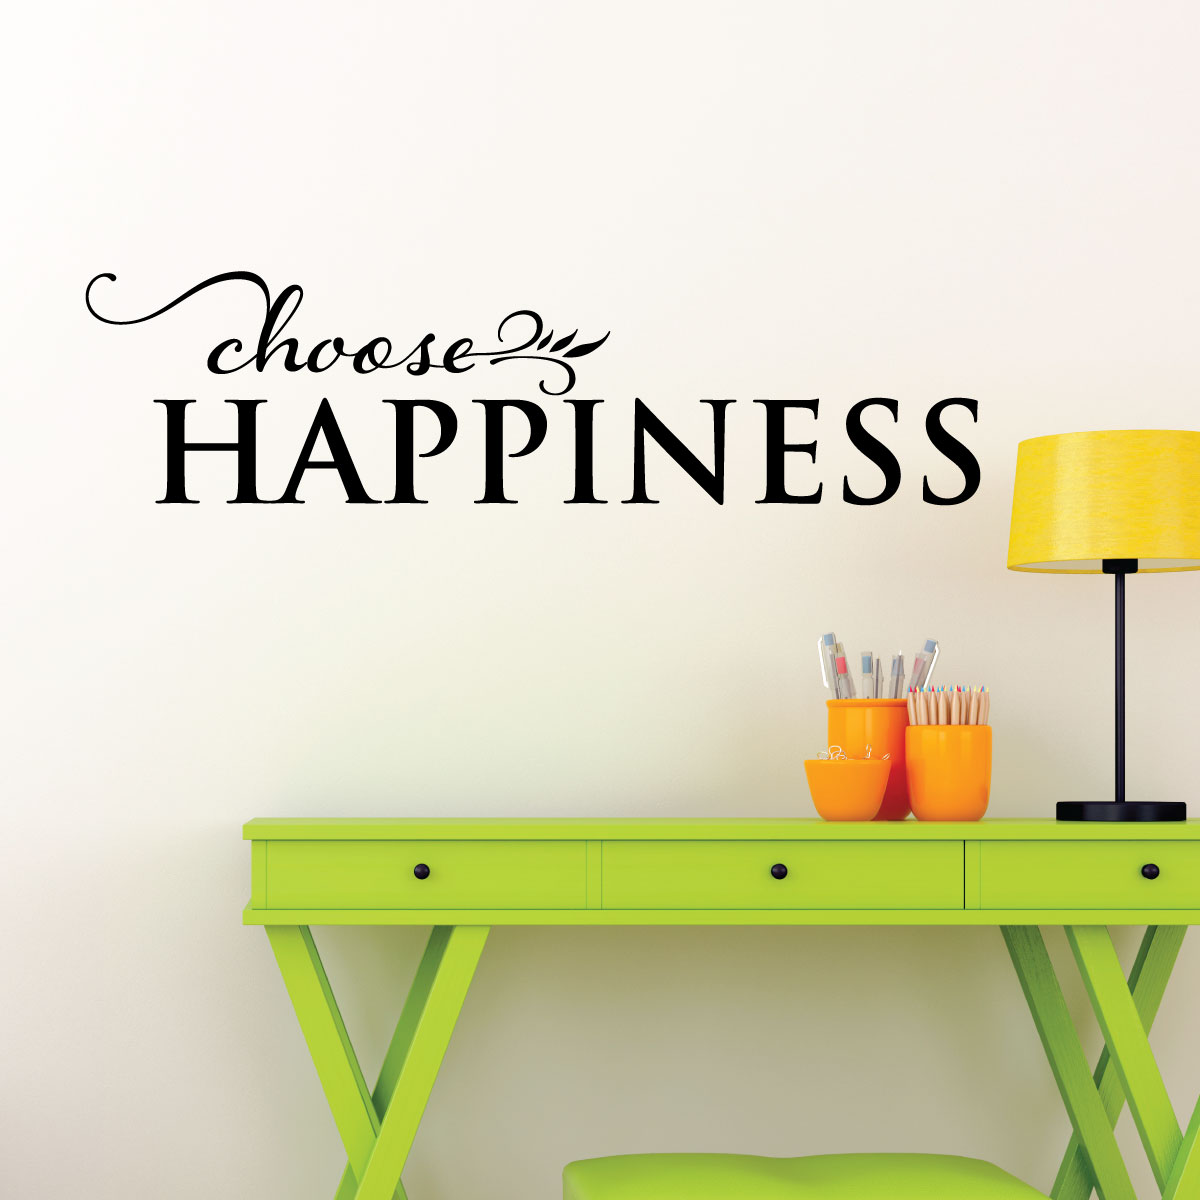 To be happy means. Happiness quotes. Happiness цитаты. Quotations about Happiness. Quotegarden.com Happiness.